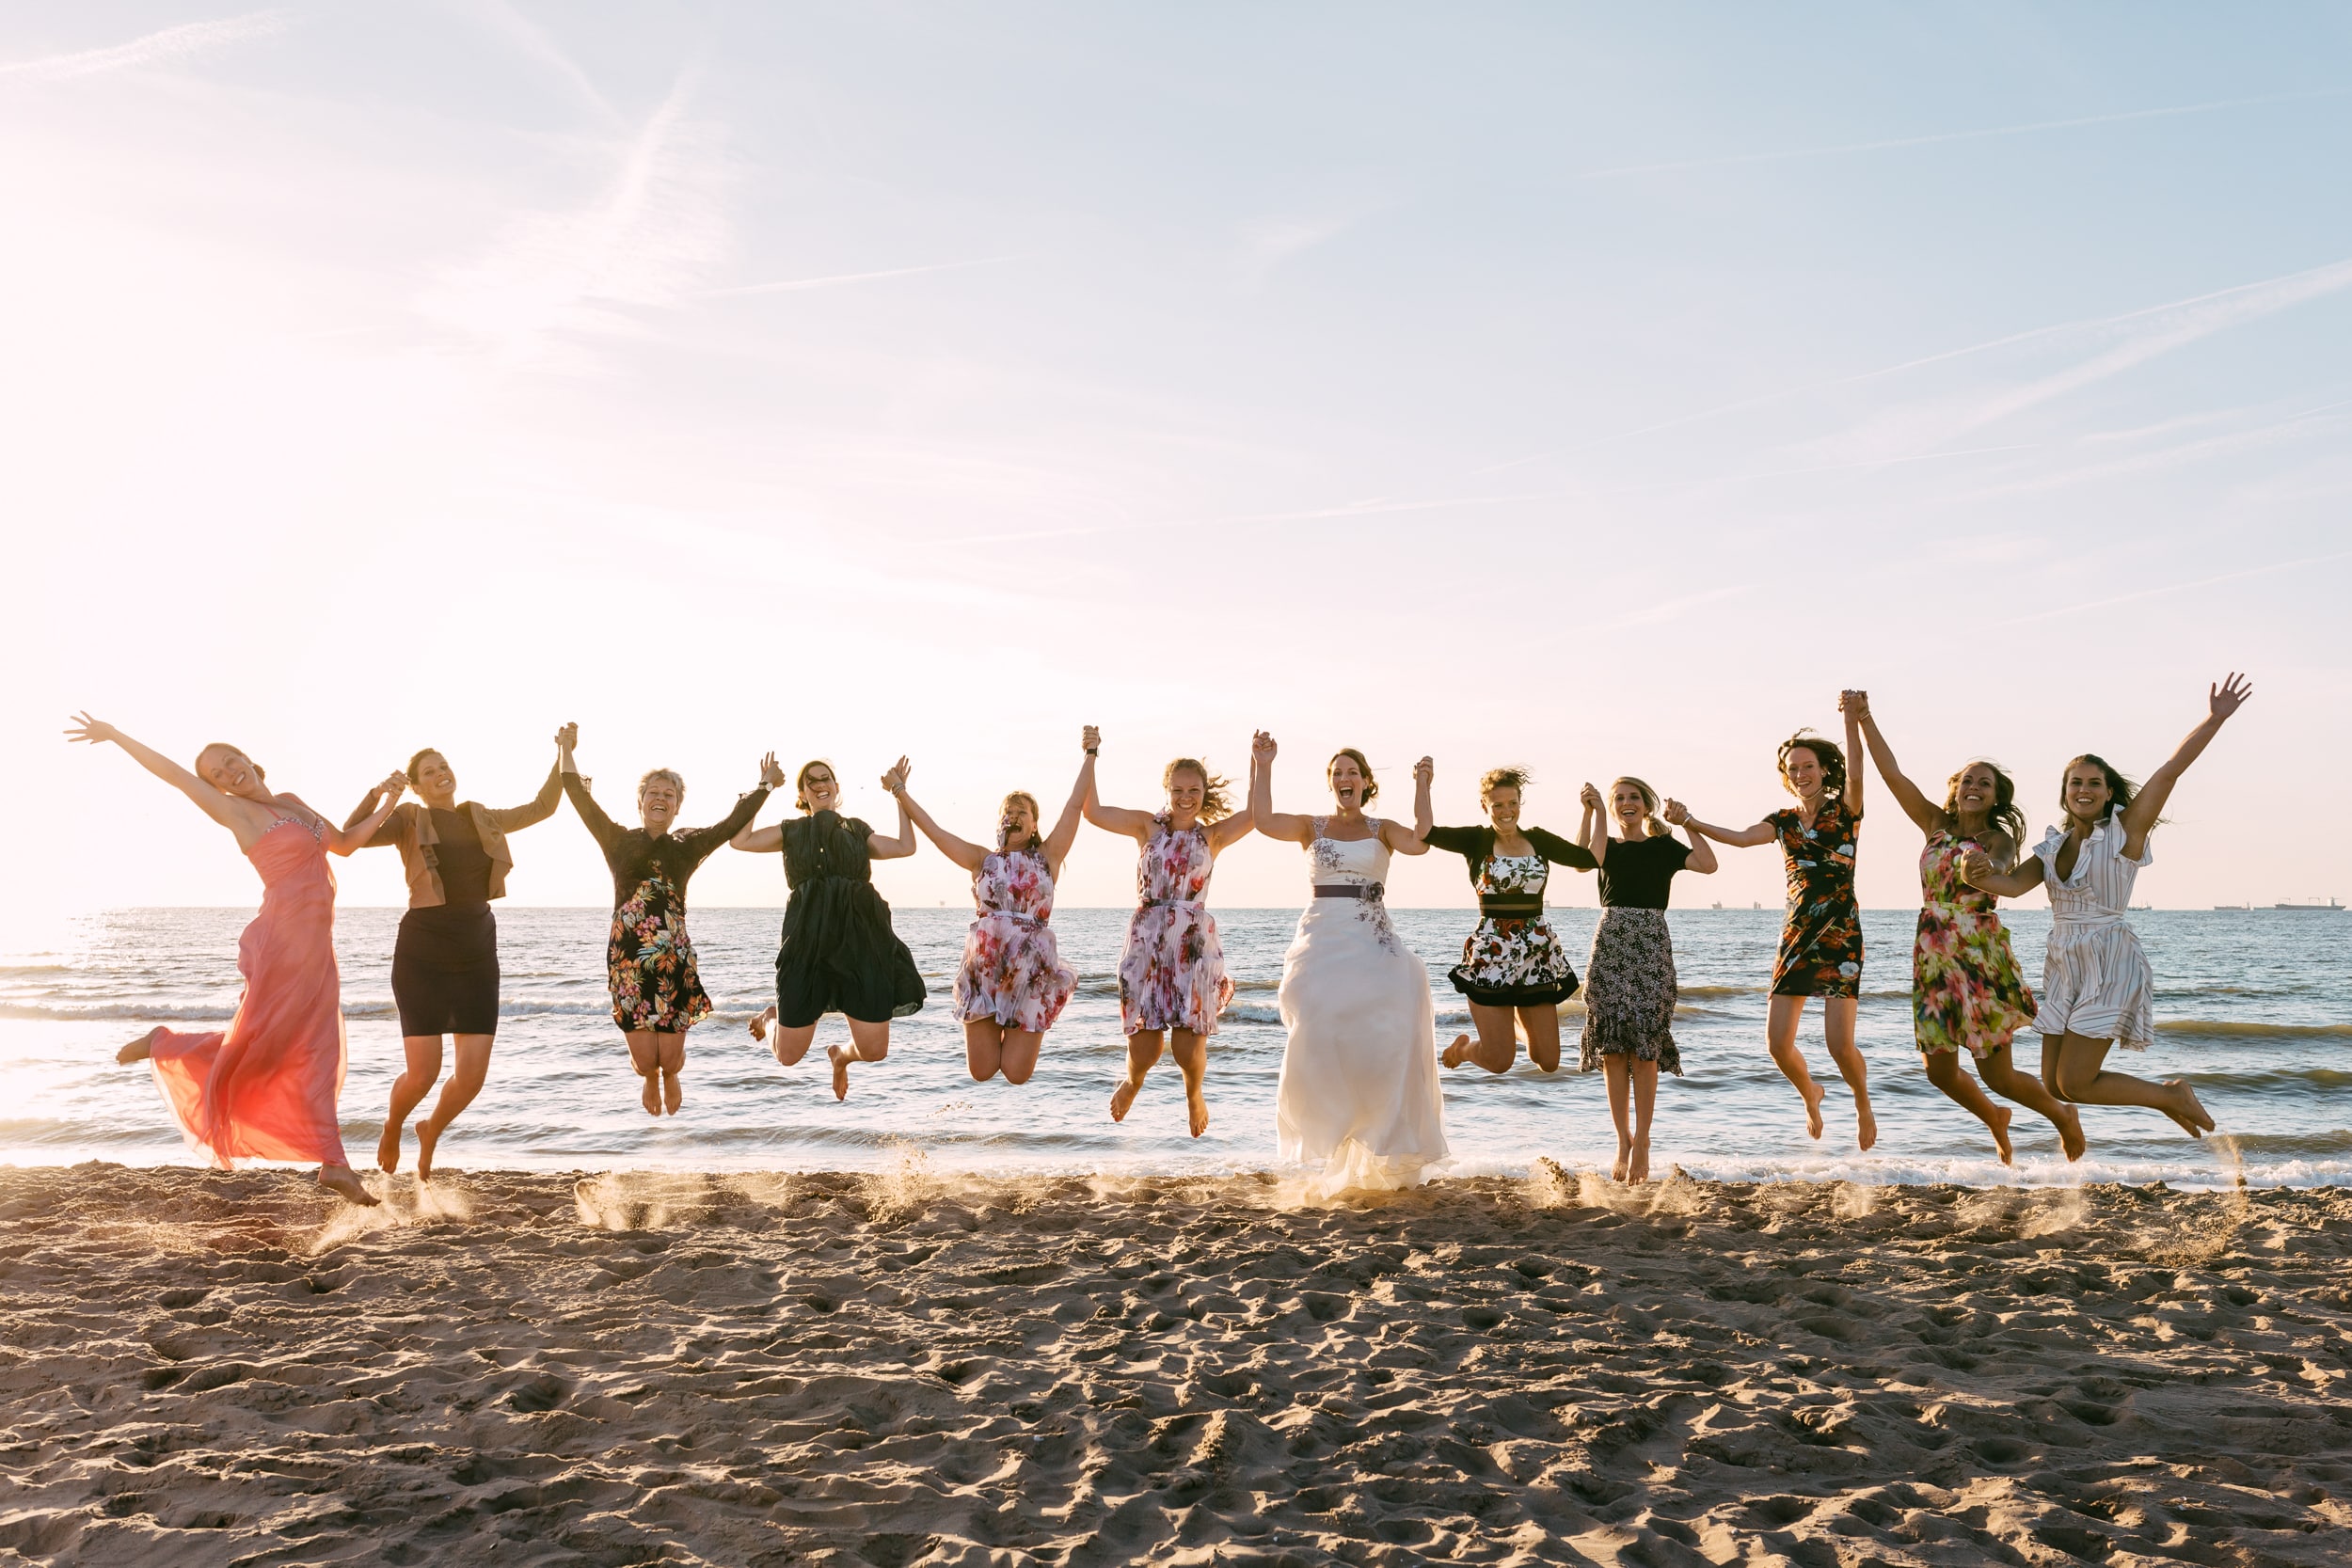 A group of bridesmaids jumping in the air on the beach during a bridal shower.